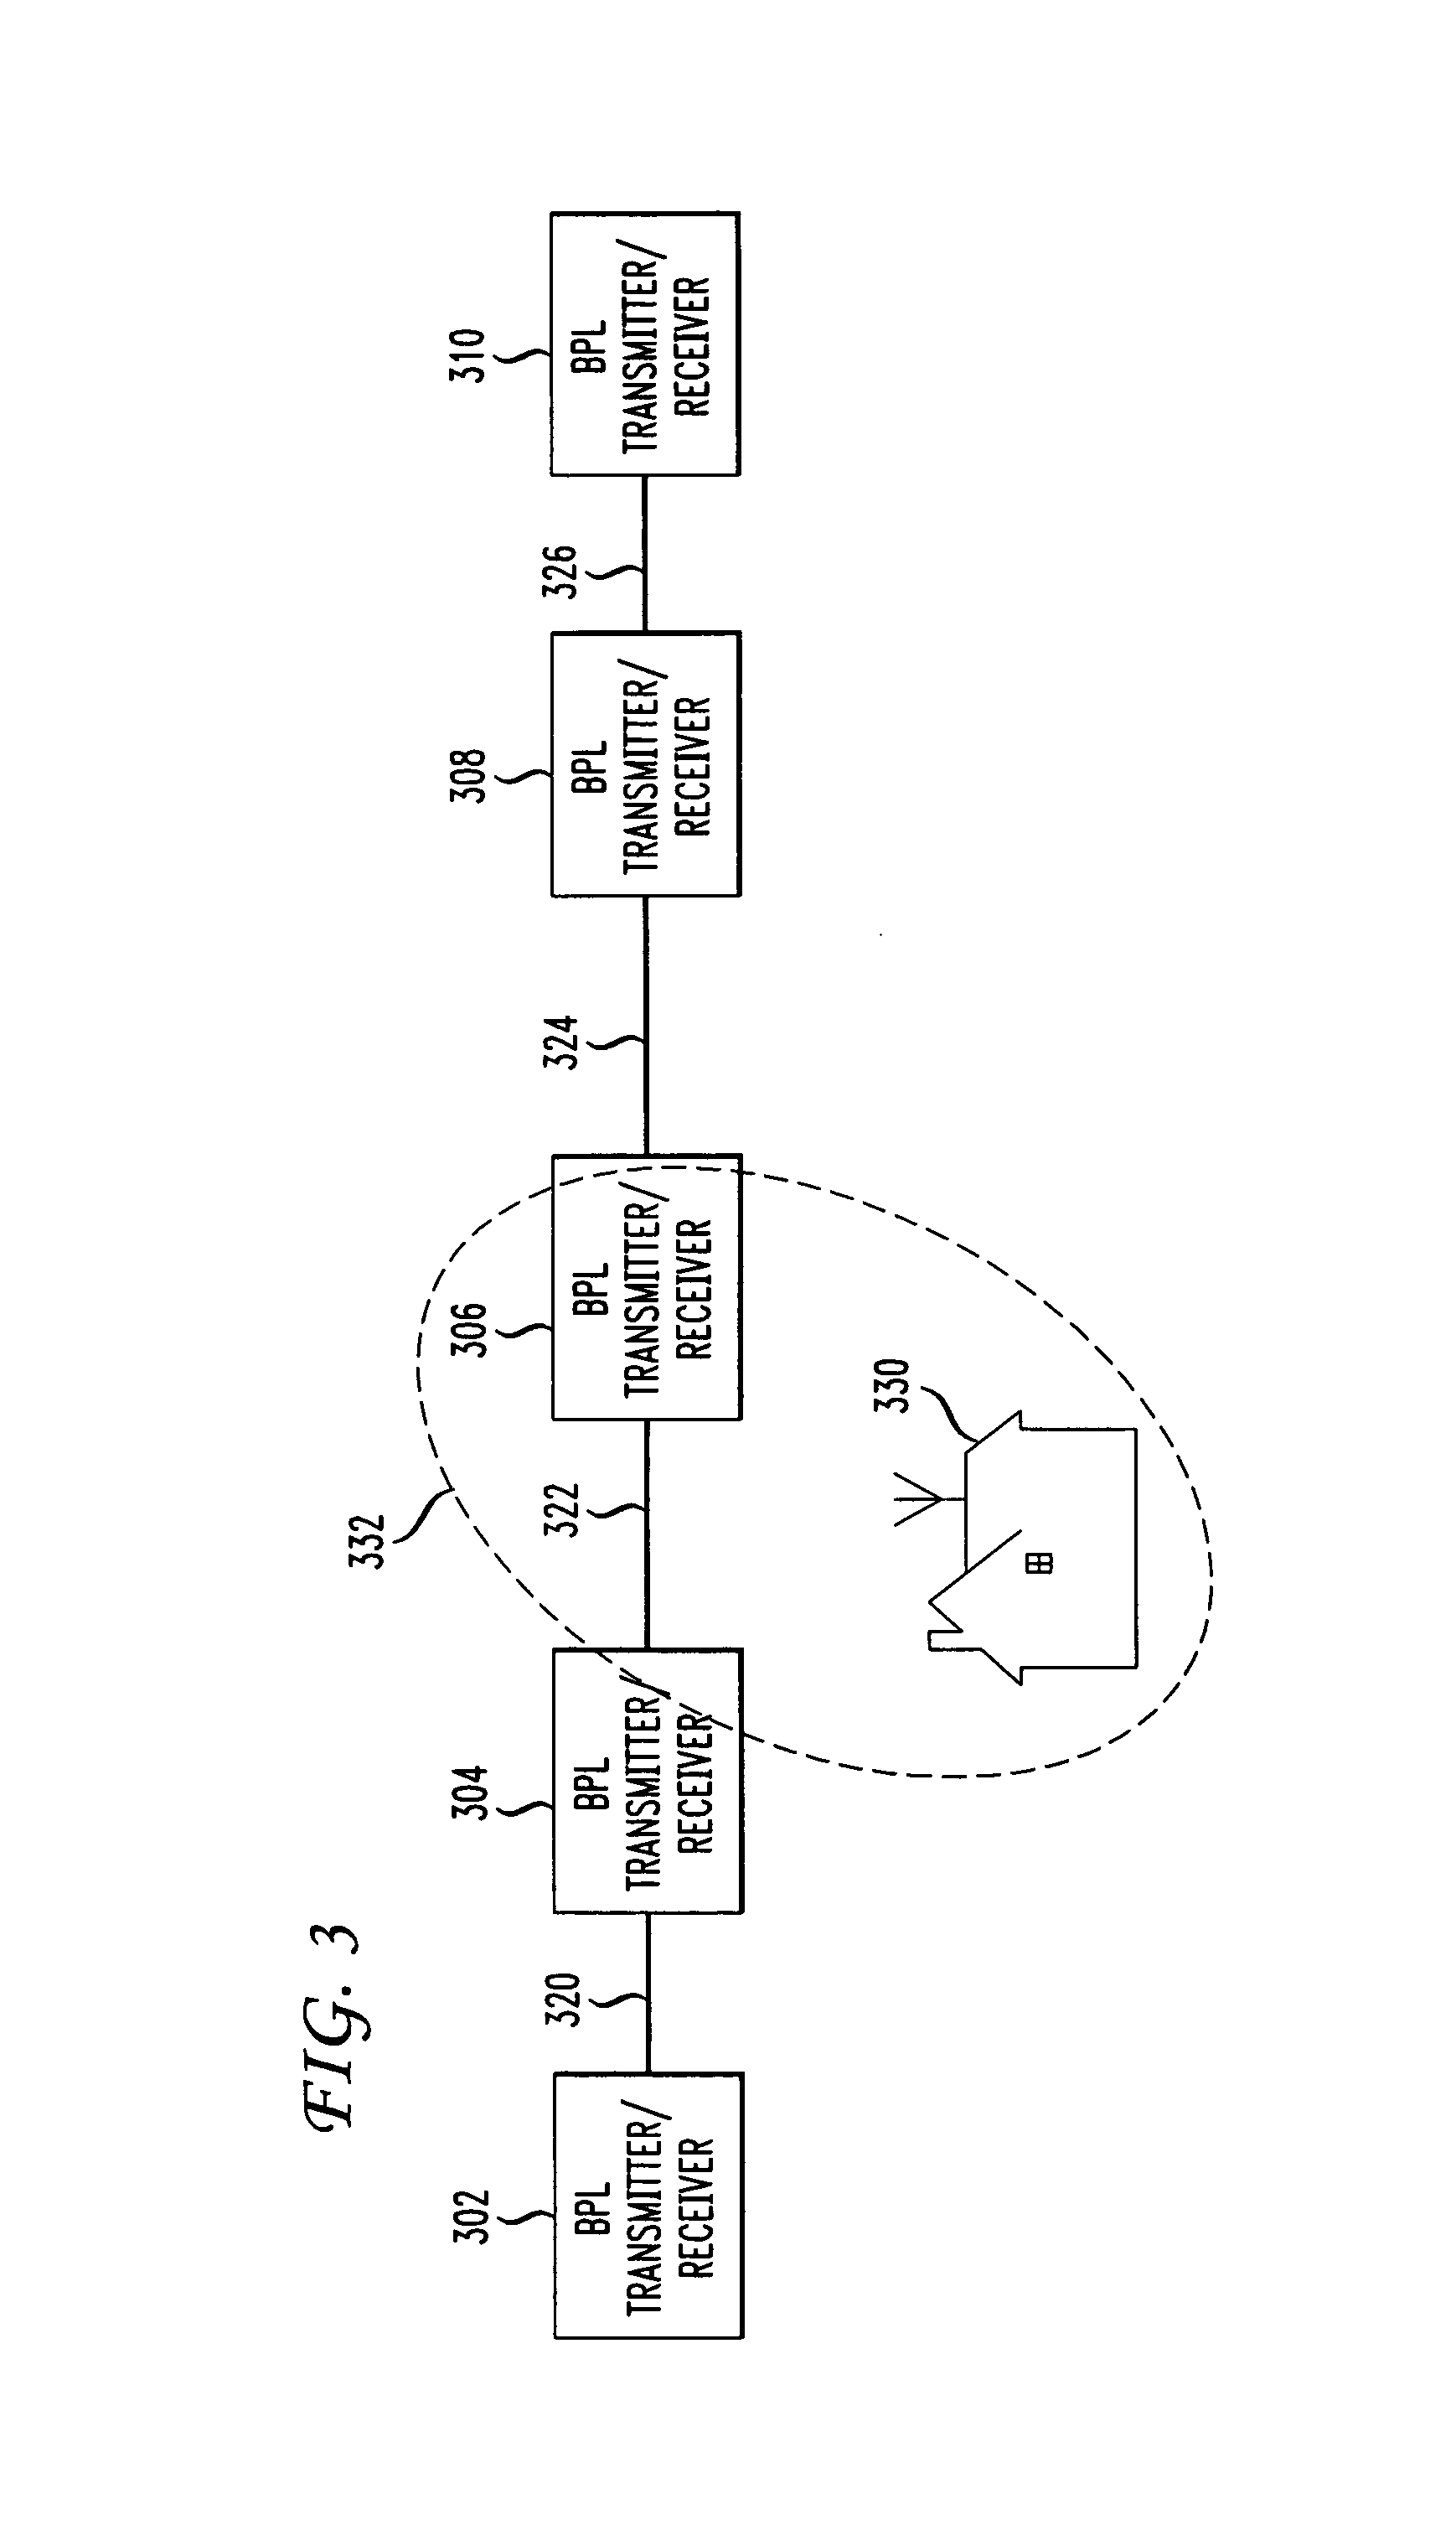 Interference control in a broadband powerline communication system